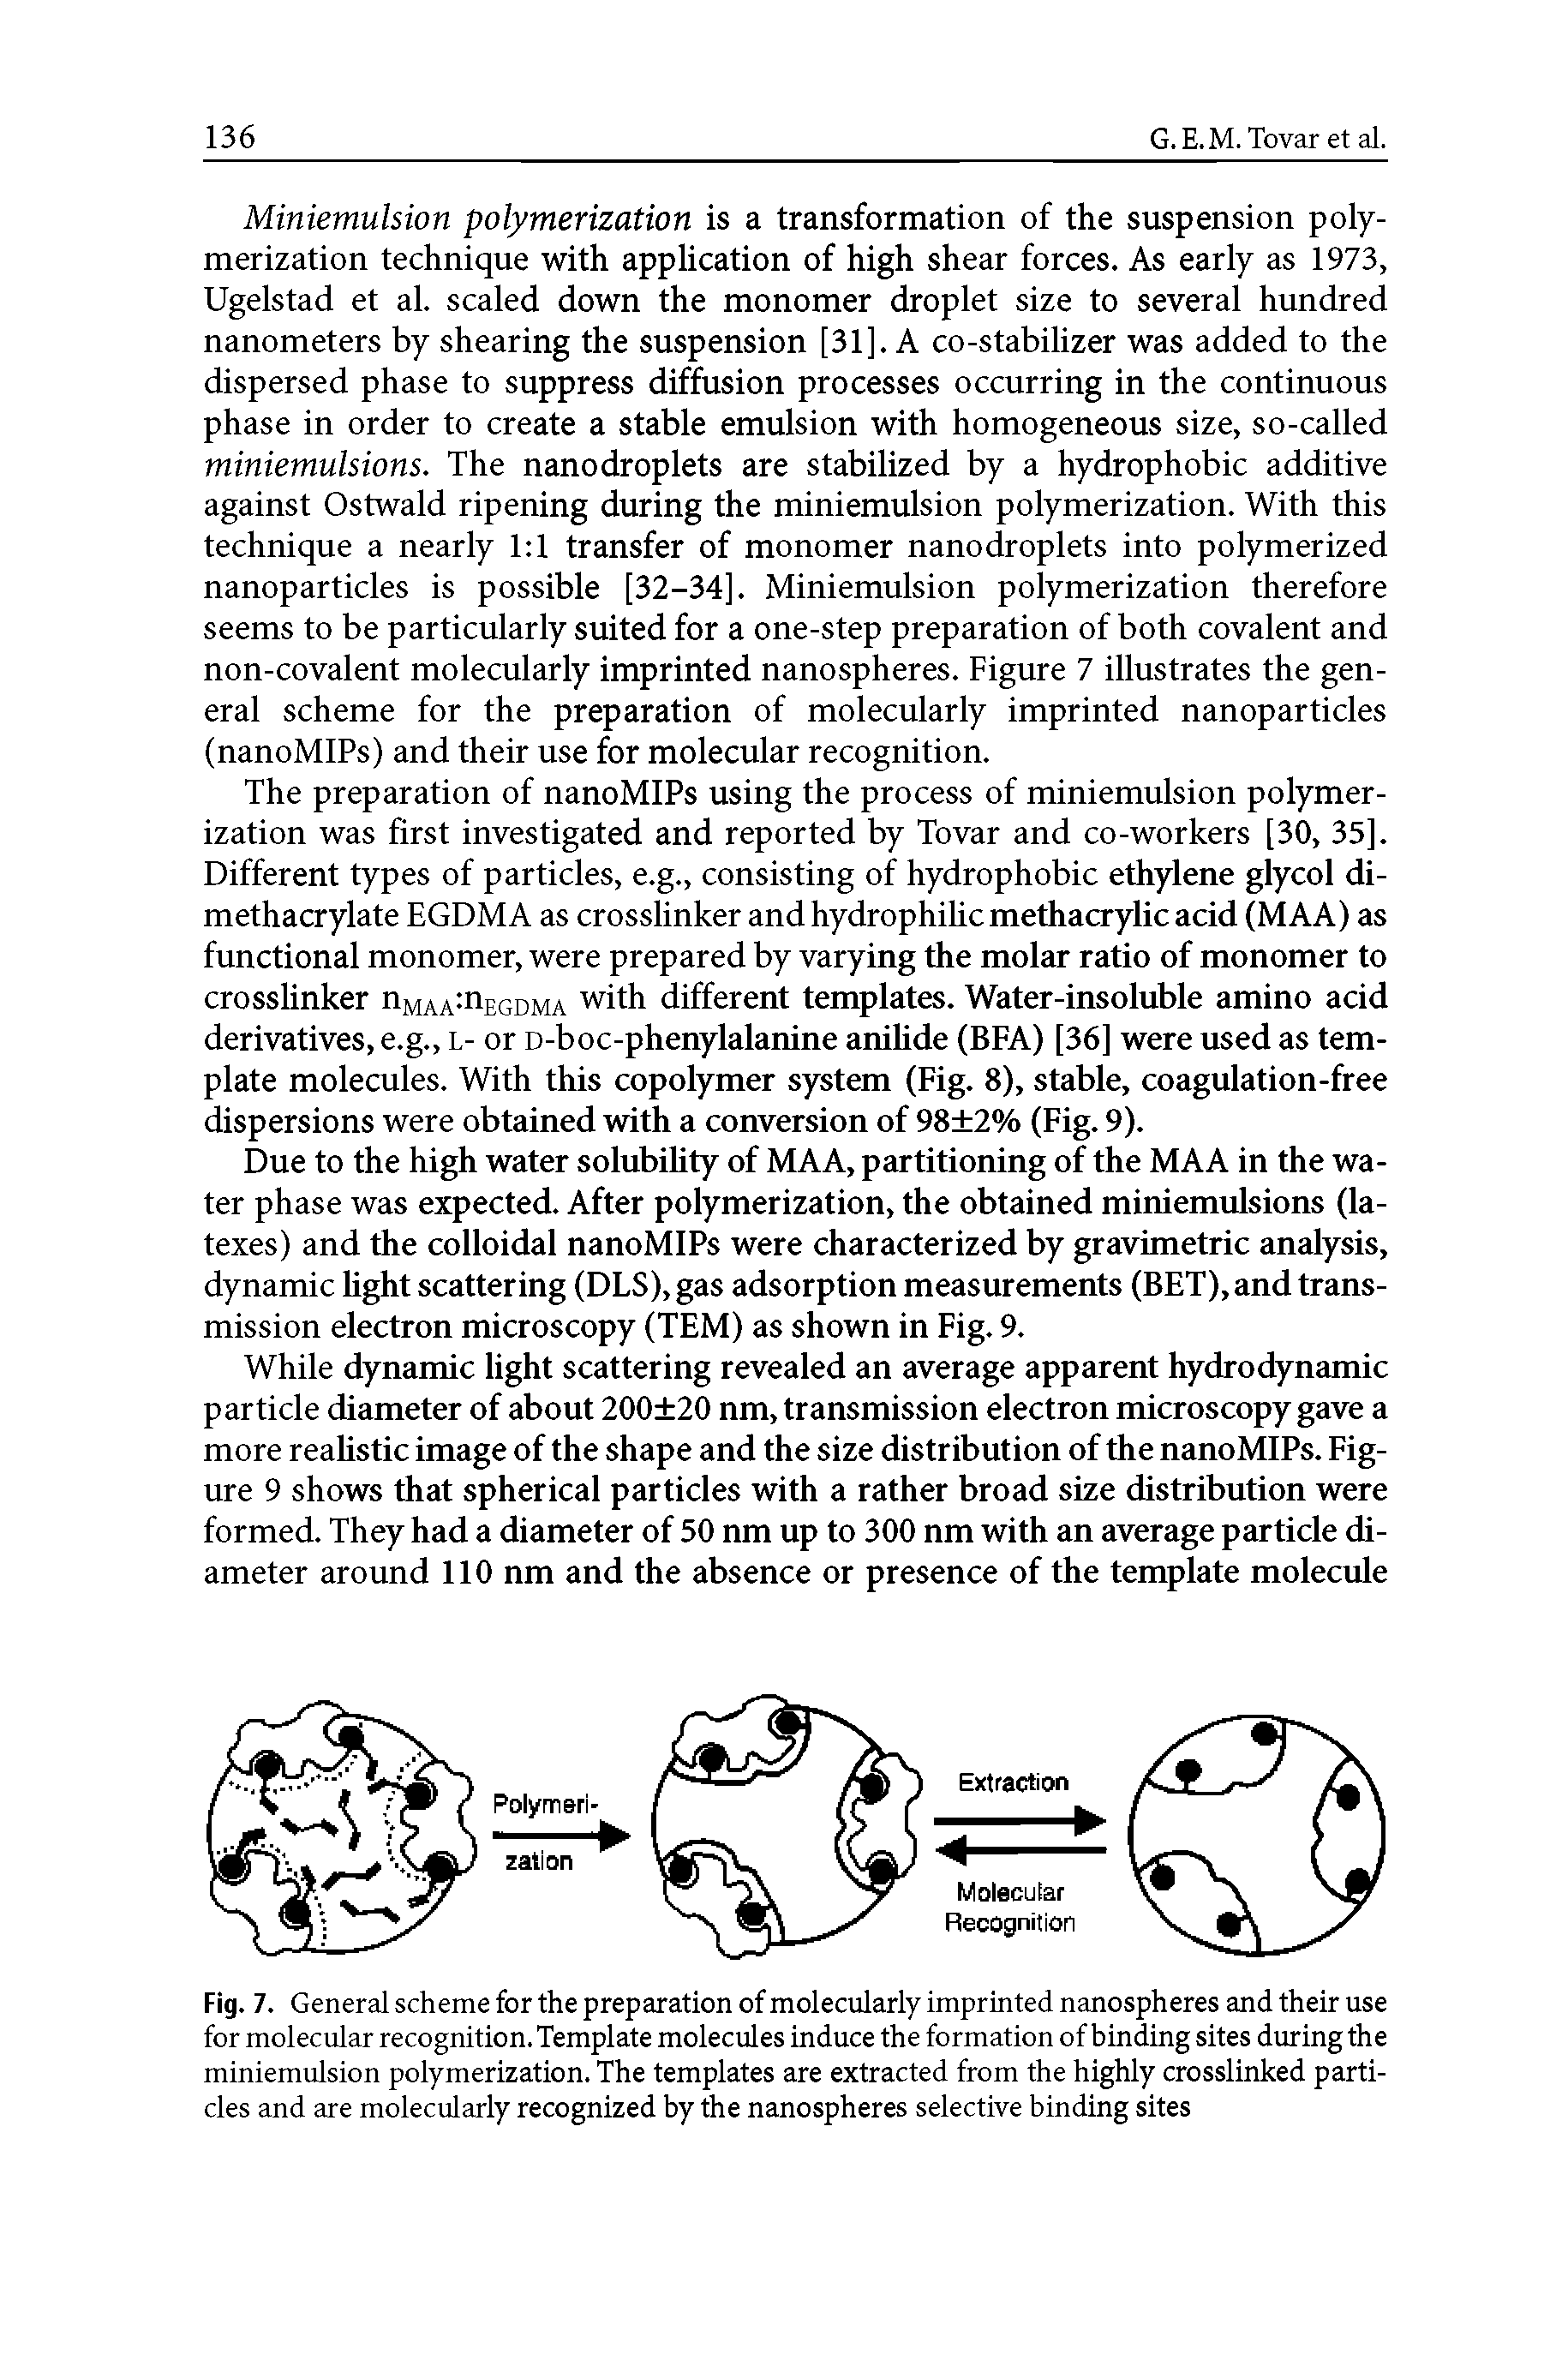 Fig. 7. General scheme for the preparation of molecularly imprinted nanospheres and their use for molecular recognition. Template molecules induce the formation of binding sites during the miniemulsion polymerization. The templates are extracted from the highly crosslinked particles and are molecularly recognized by the nanospheres selective binding sites...